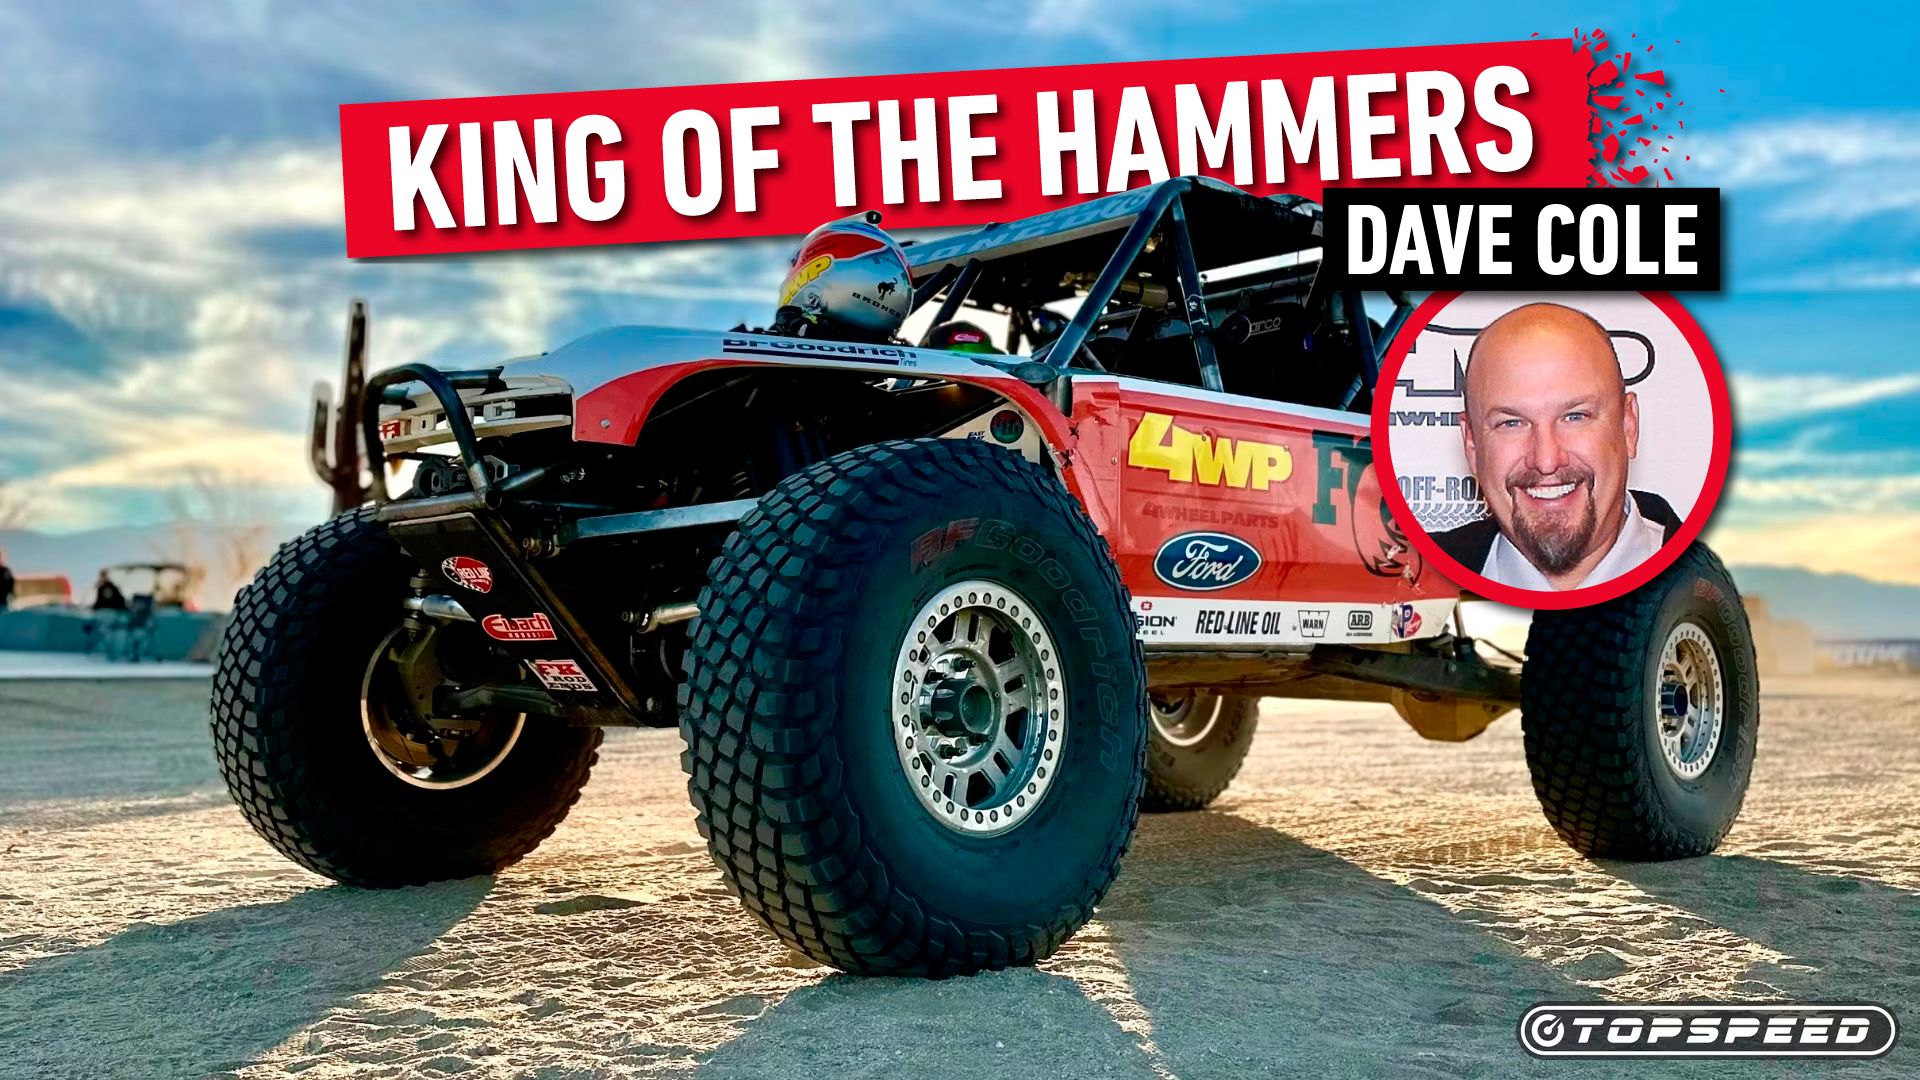 King-of-the-Hammers-Dave-Cole